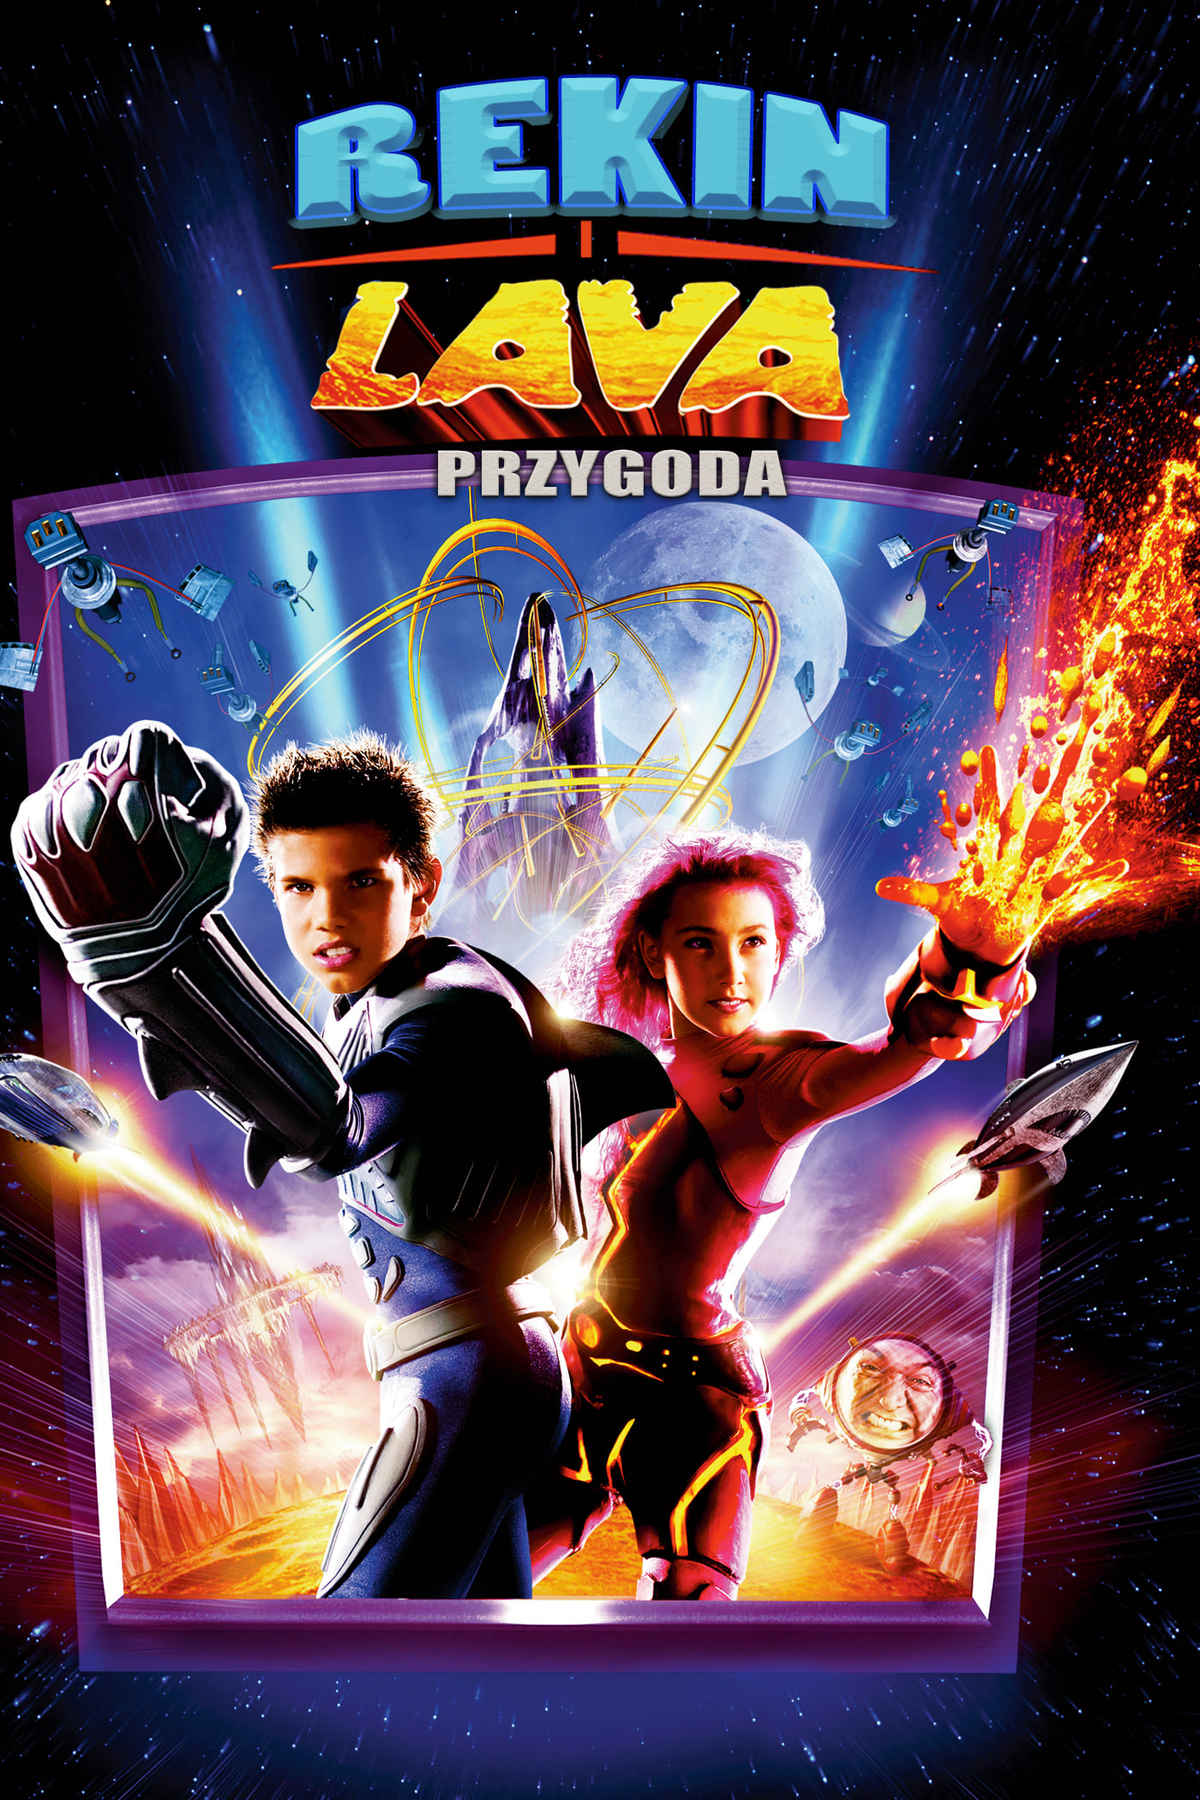 The Adventures Of Sharkboy And Lavagirl